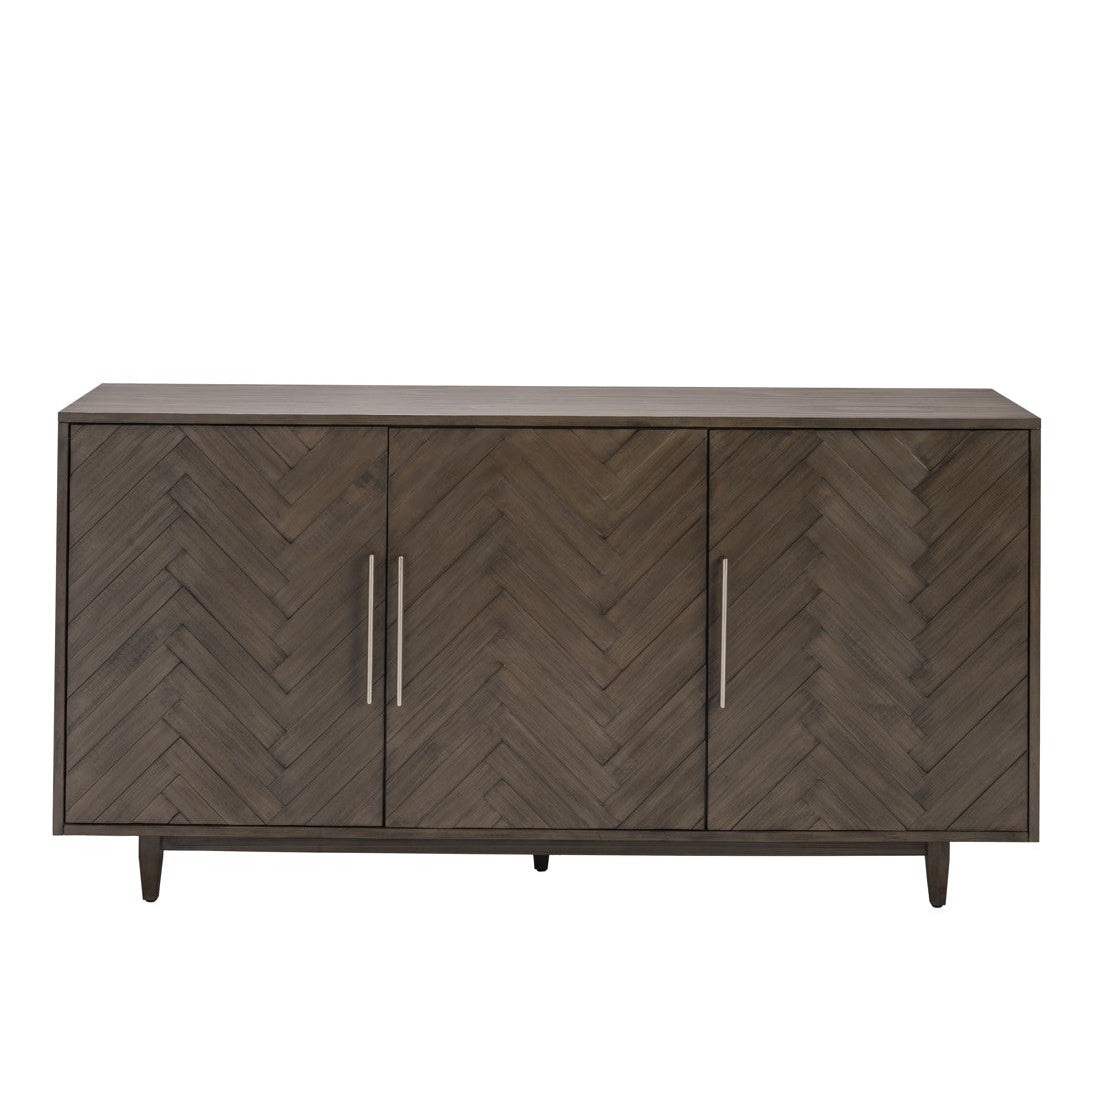 Crestview Collection Hawthorne Estate 70" x 18" x 36" 3-Door Traditional Wood Chevron Pattern Sideboard In Charcoal Gray Finish